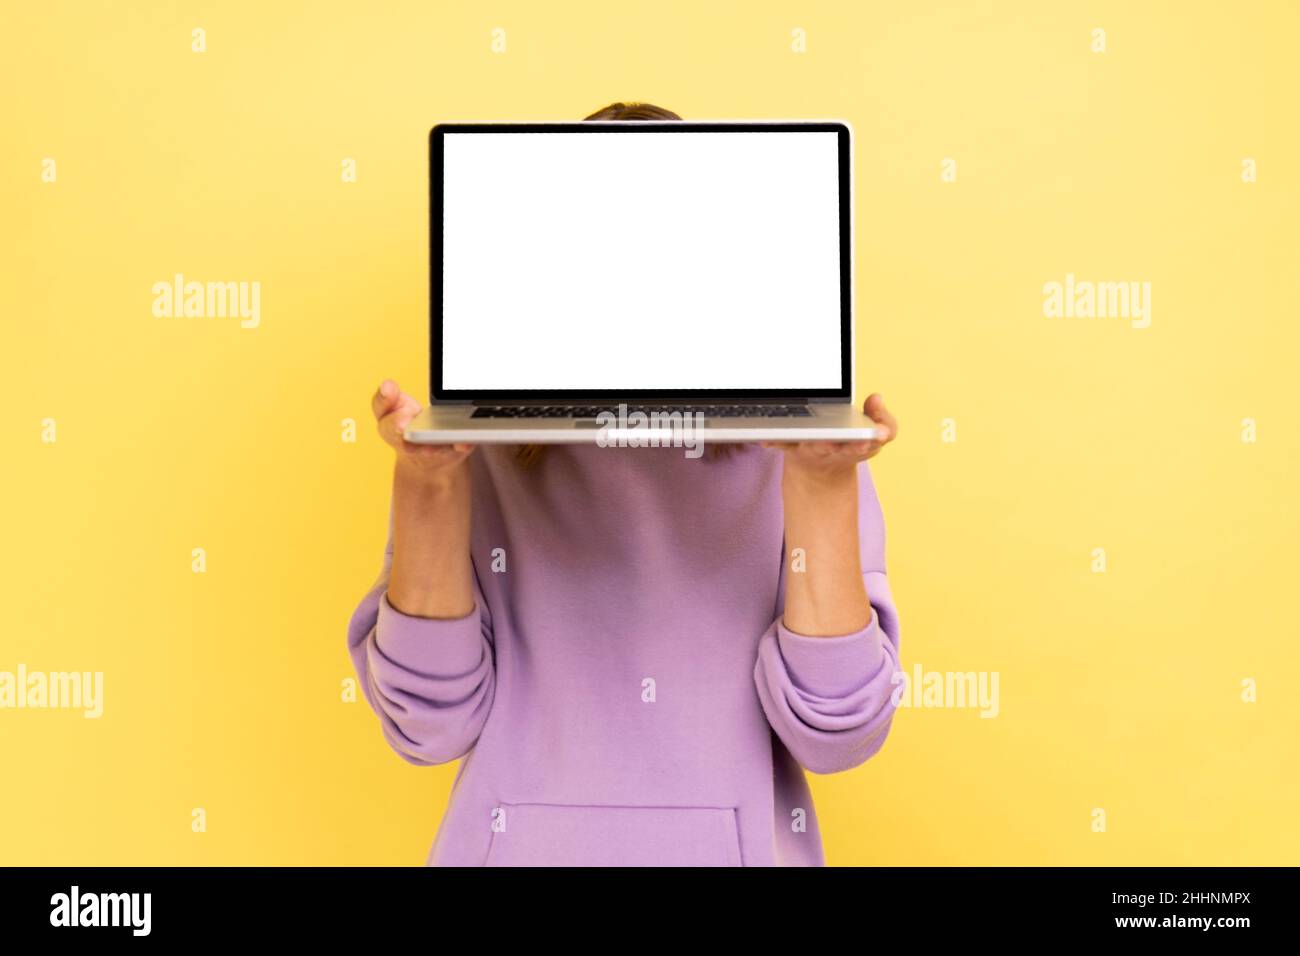 Portrait of unrecognizable woman hiding her face behind laptop with blank display for advertisement or promotional text, wearing purple hoodie. Indoor studio shot isolated on yellow background. Stock Photo